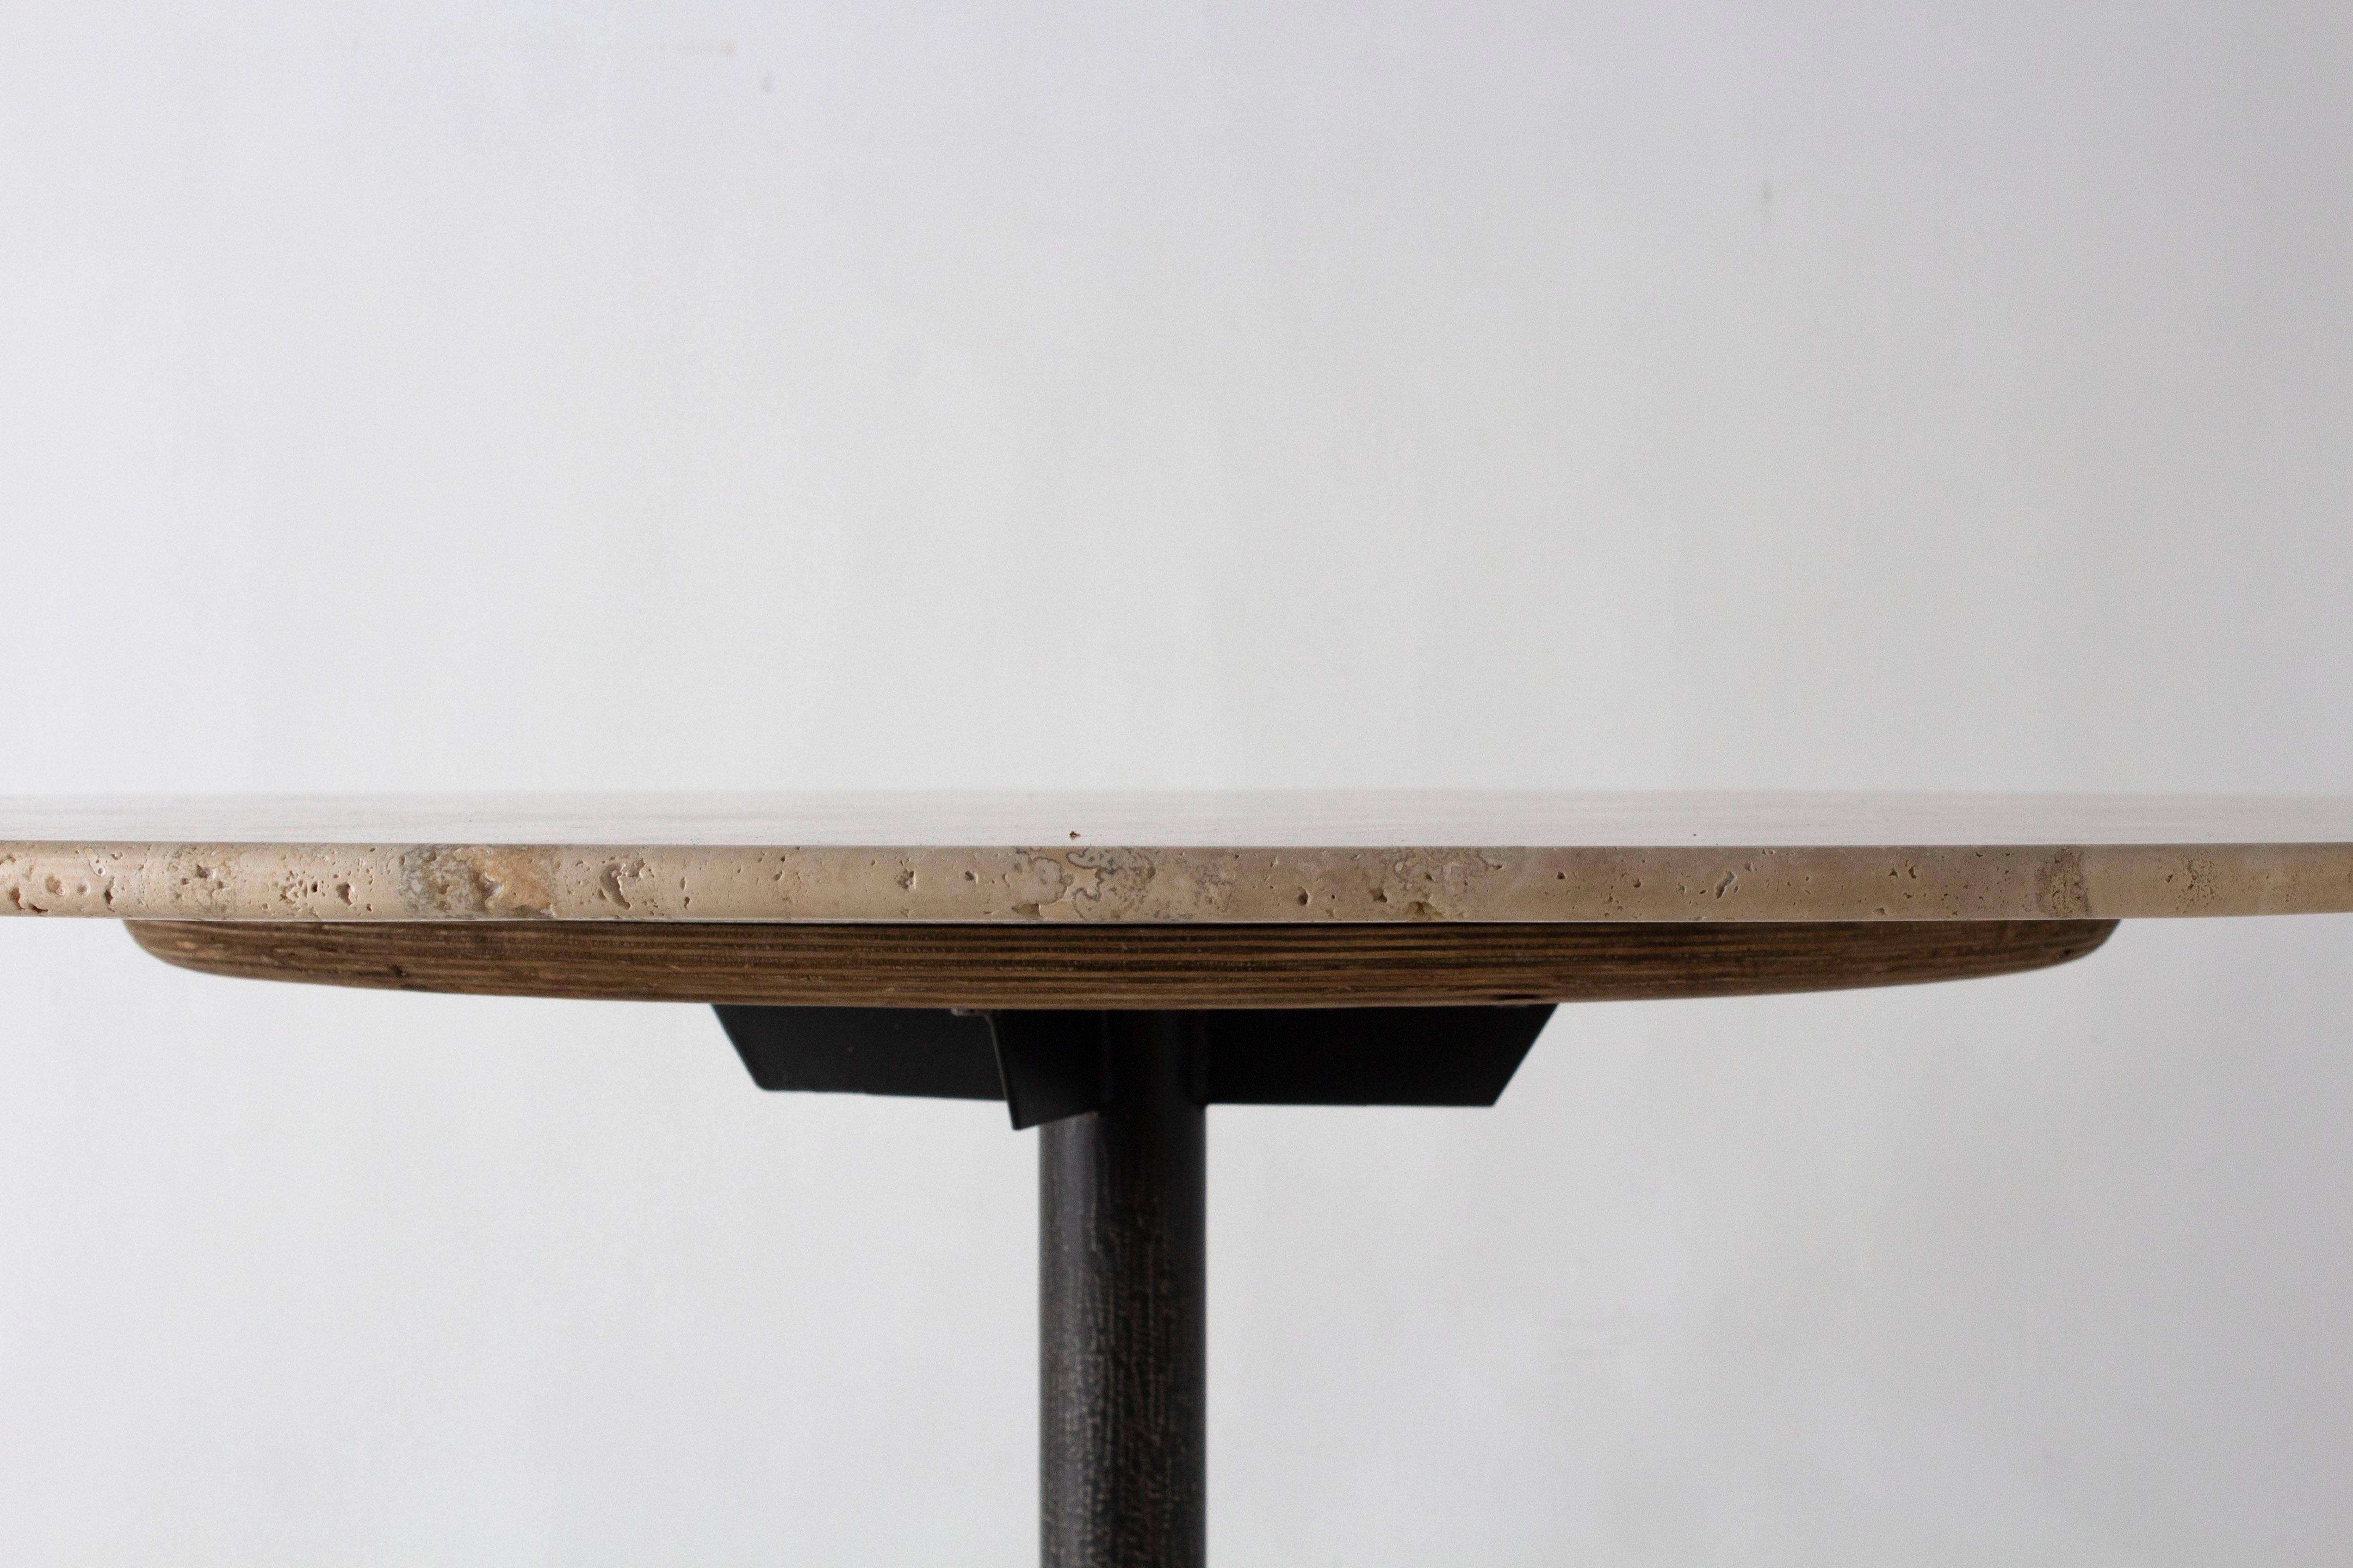 Patinated Travertine Dining Table with Knoll Edge and Tulip Base